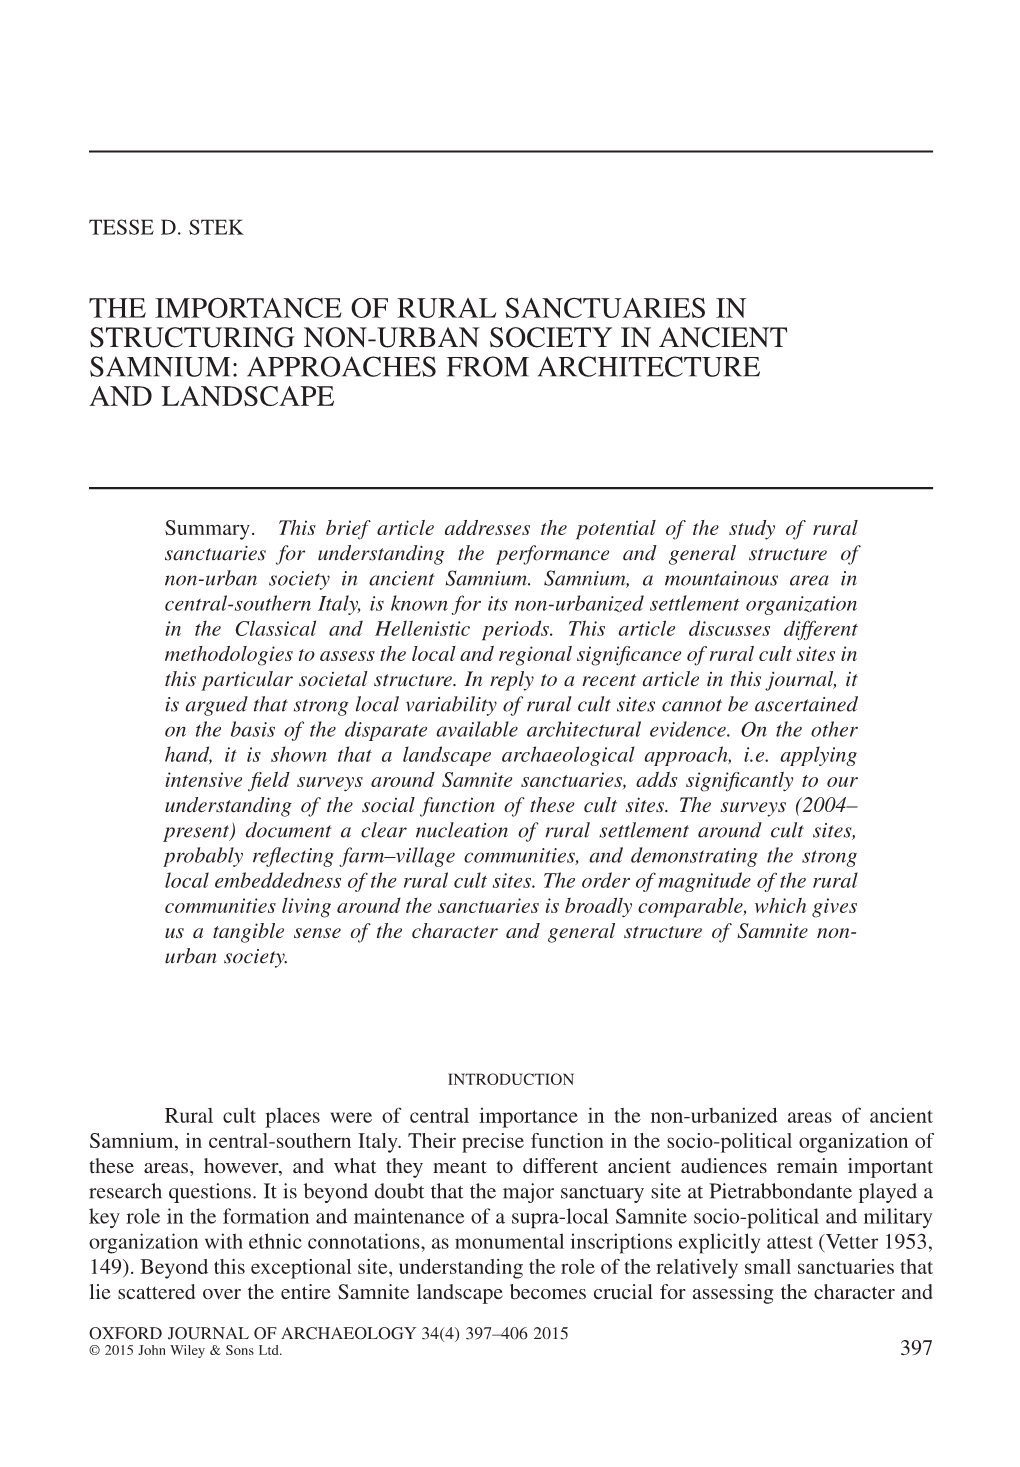 The Importance of Rural Sanctuaries in Structuring Nonurban Society In